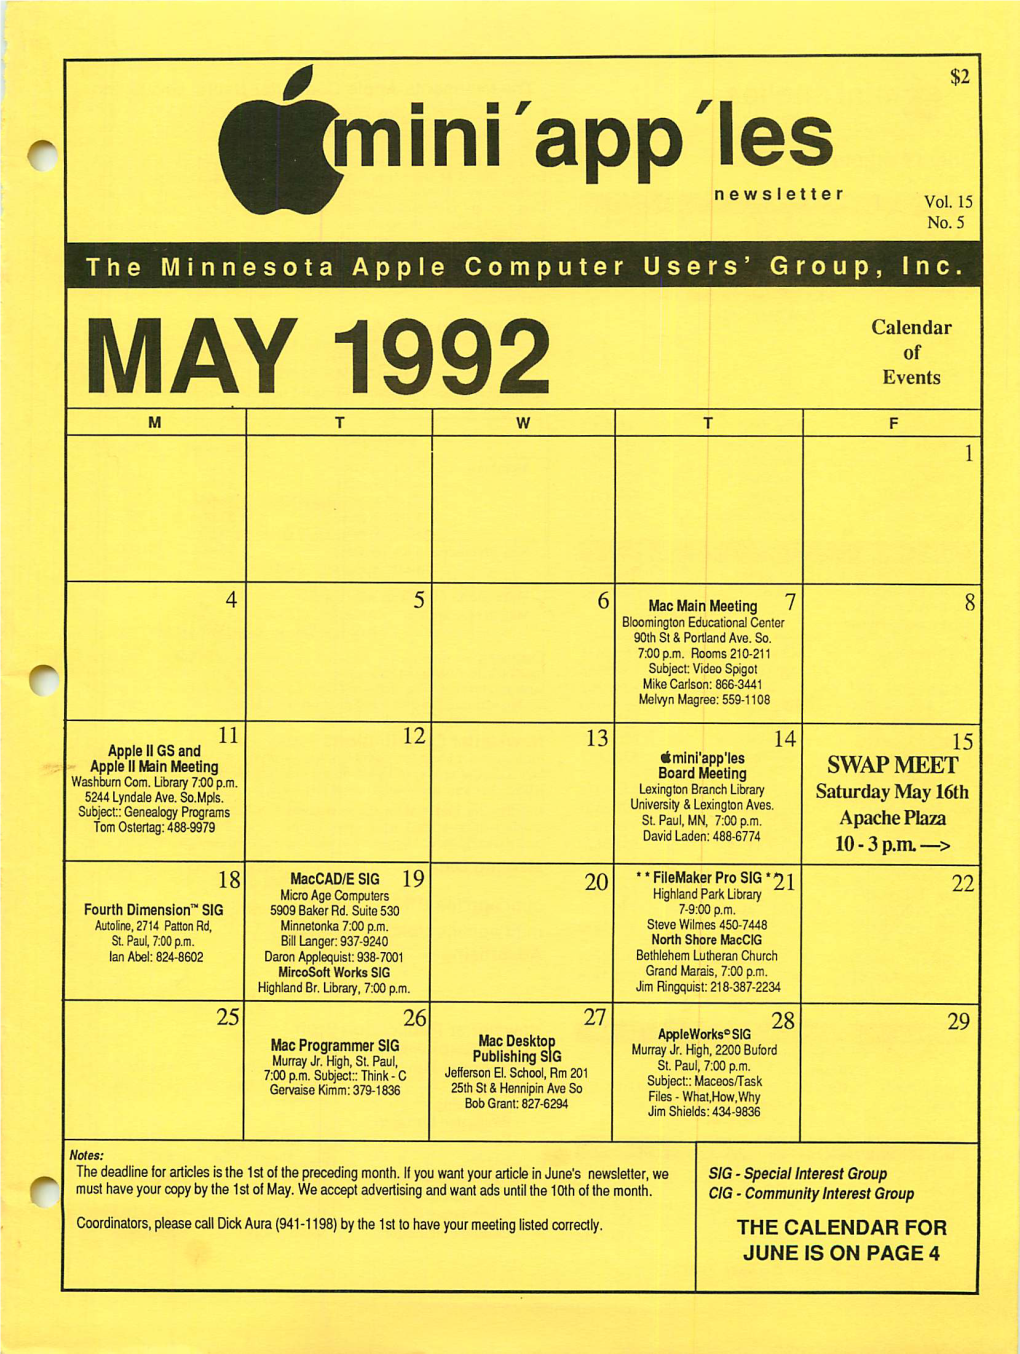 MAY 1992 Events M T W T F 1